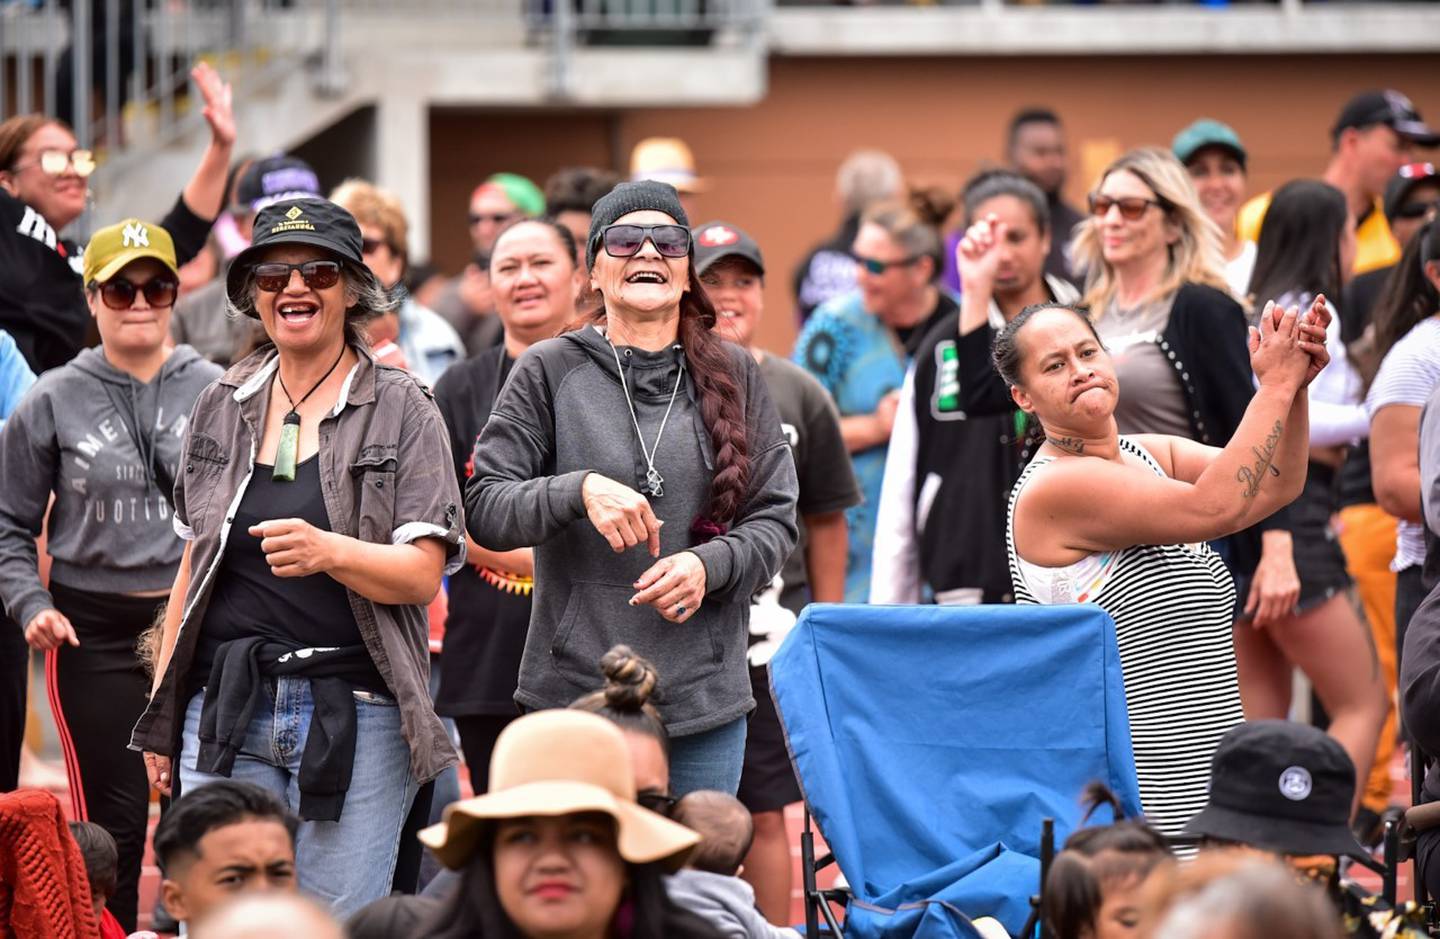 Thousands turnout for Waitangi Day celebrations and commemorations in